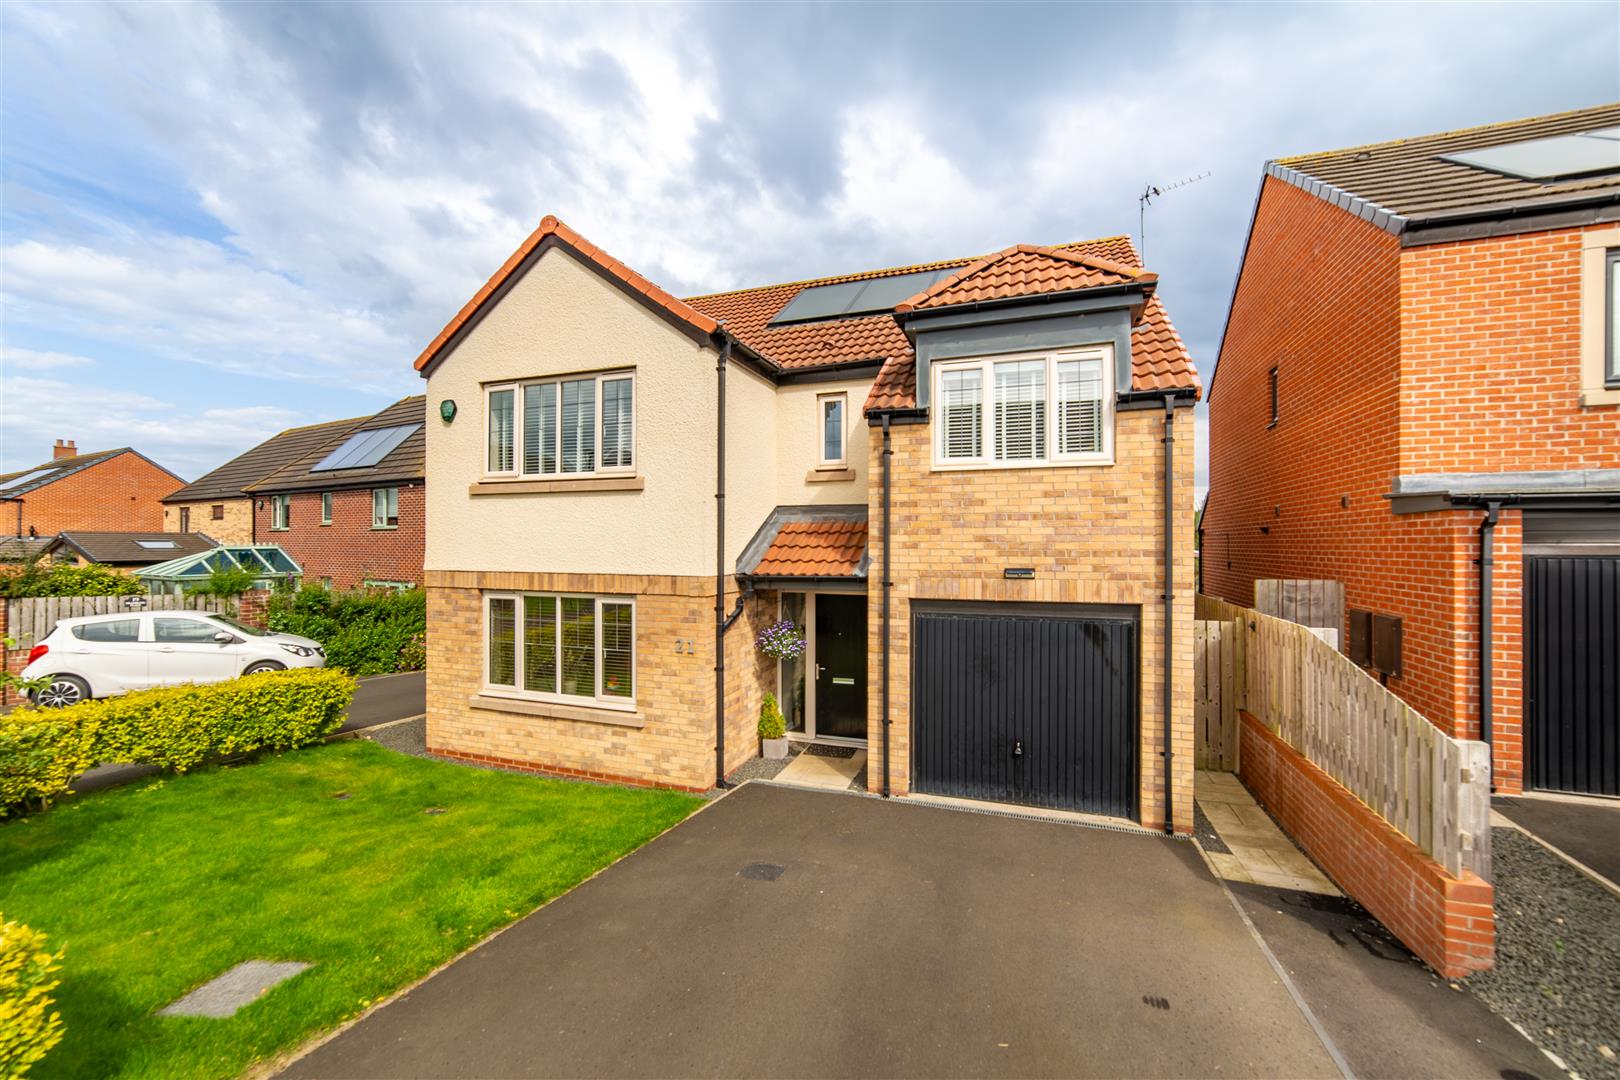 4 bed detached house for sale in Brambling Place, Five Mile Park, NE13